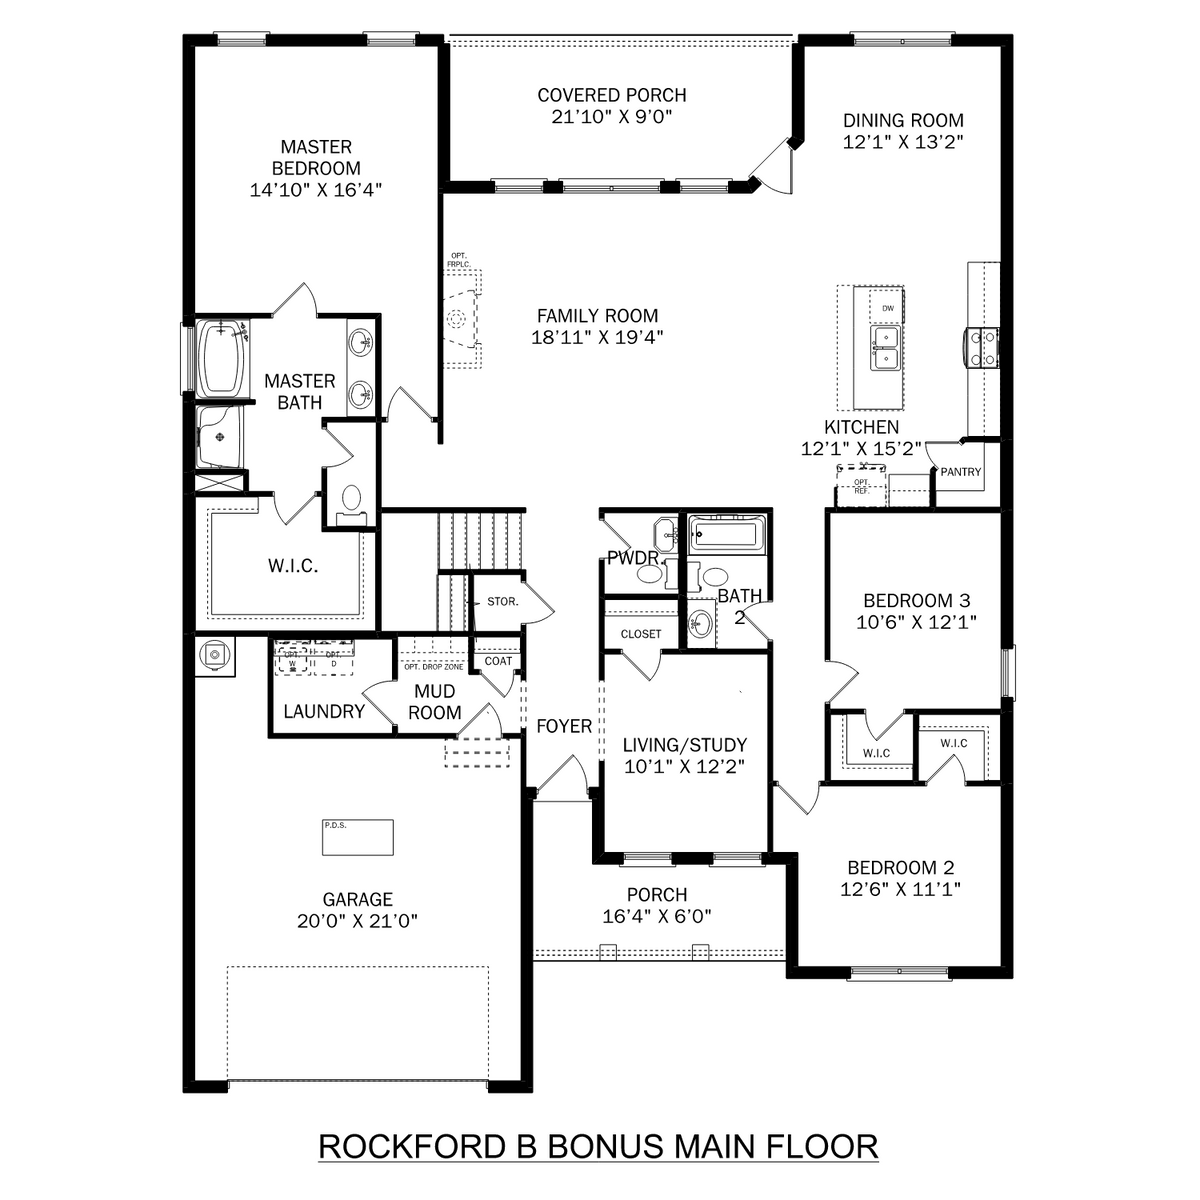 1 - The Rockford B with Bonus buildable floor plan layout in Davidson Homes' Cain Park community.